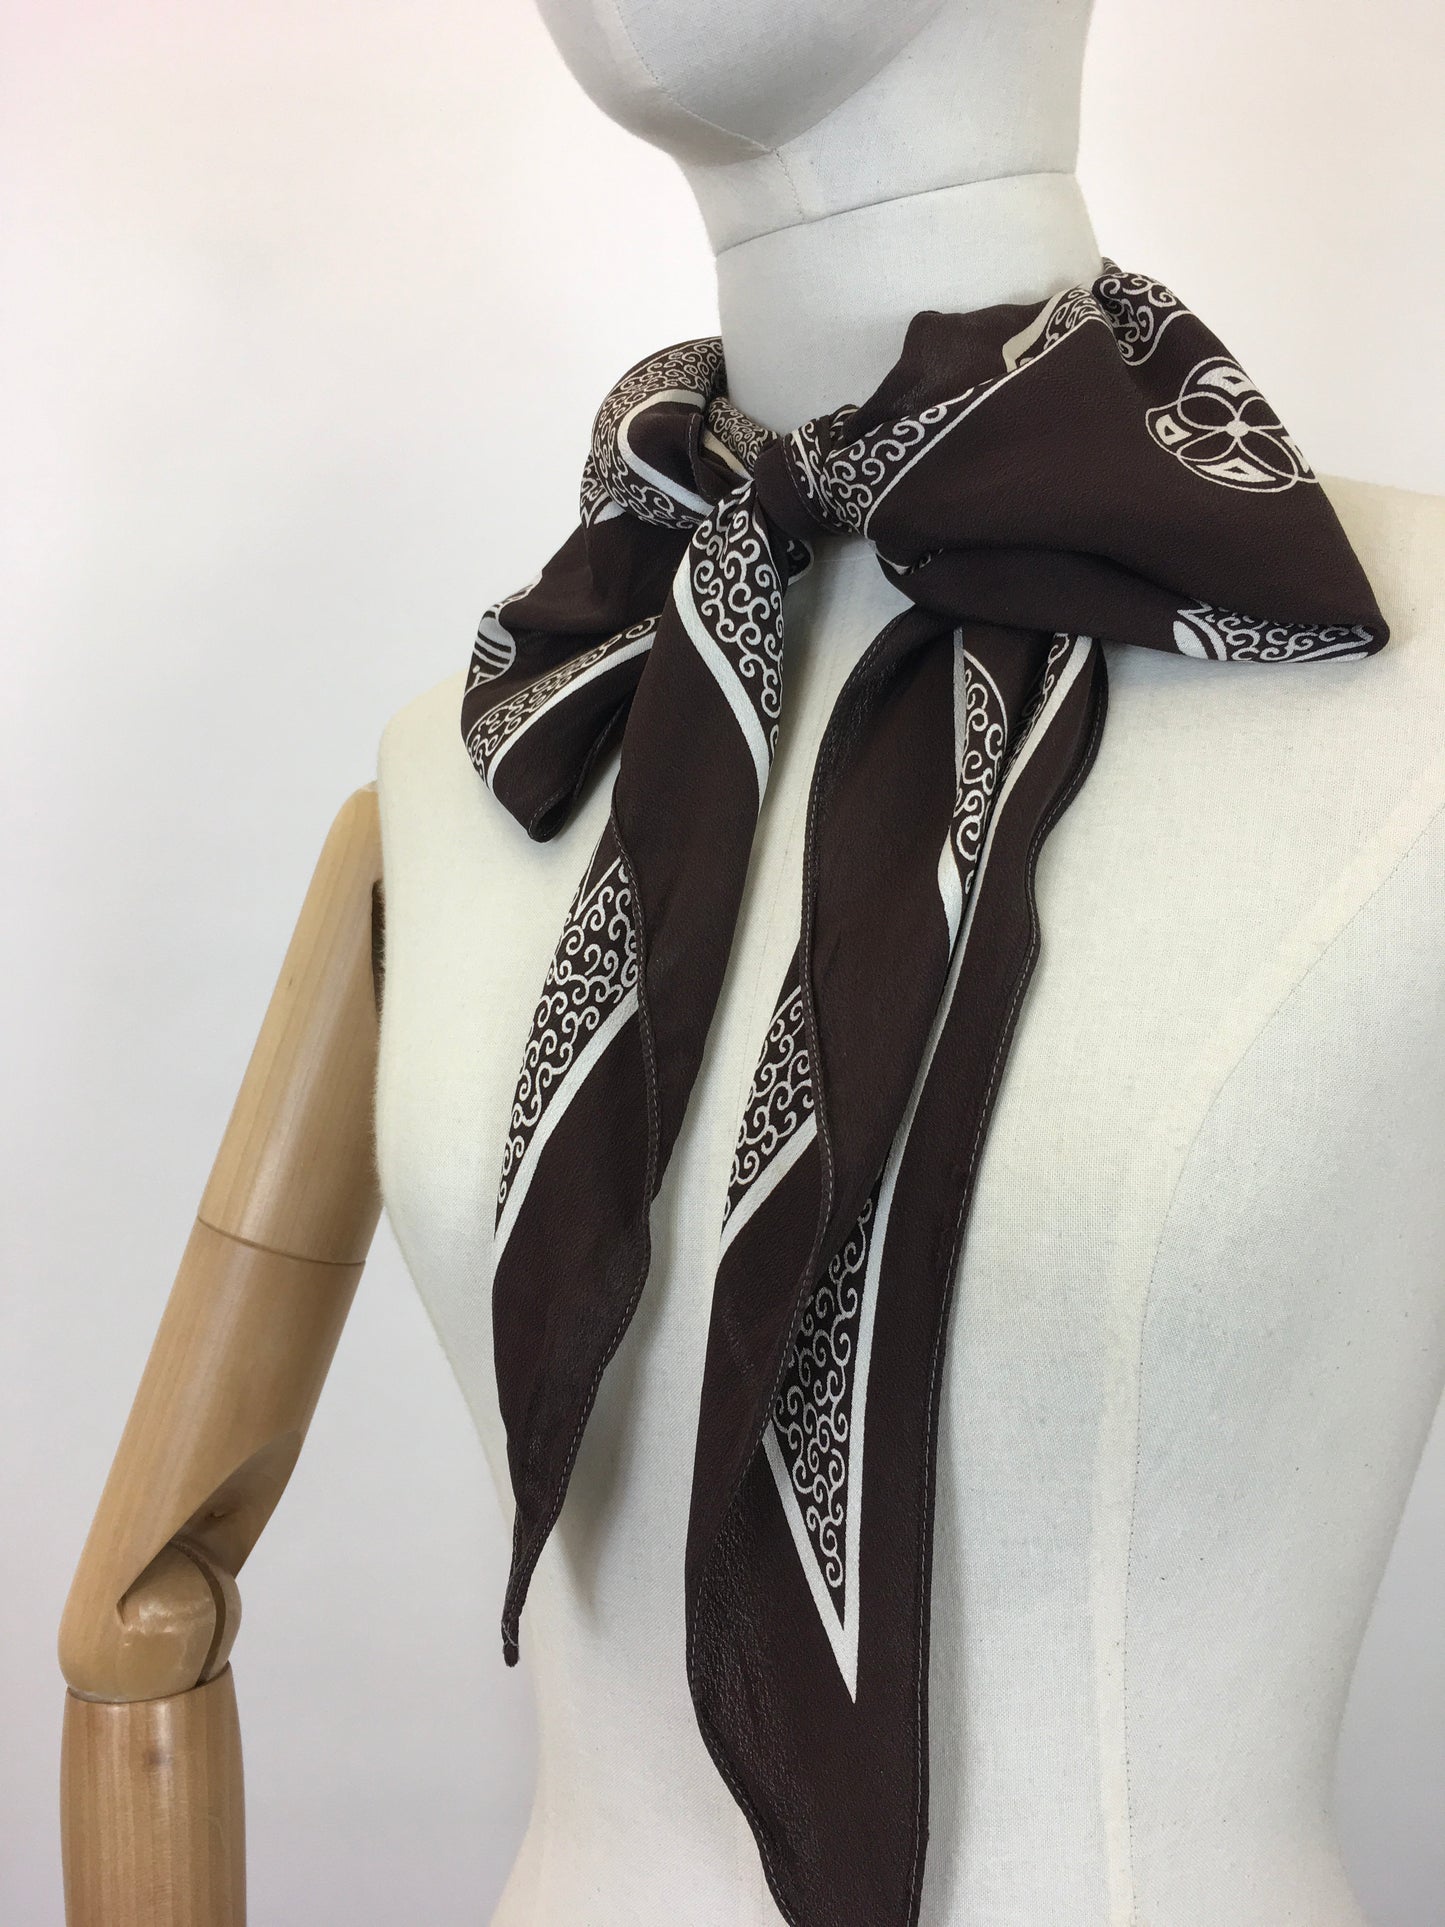 Original 1930's / 1940's Rayon Silk Deco Scarf - In A Chocolate Brown and Off White